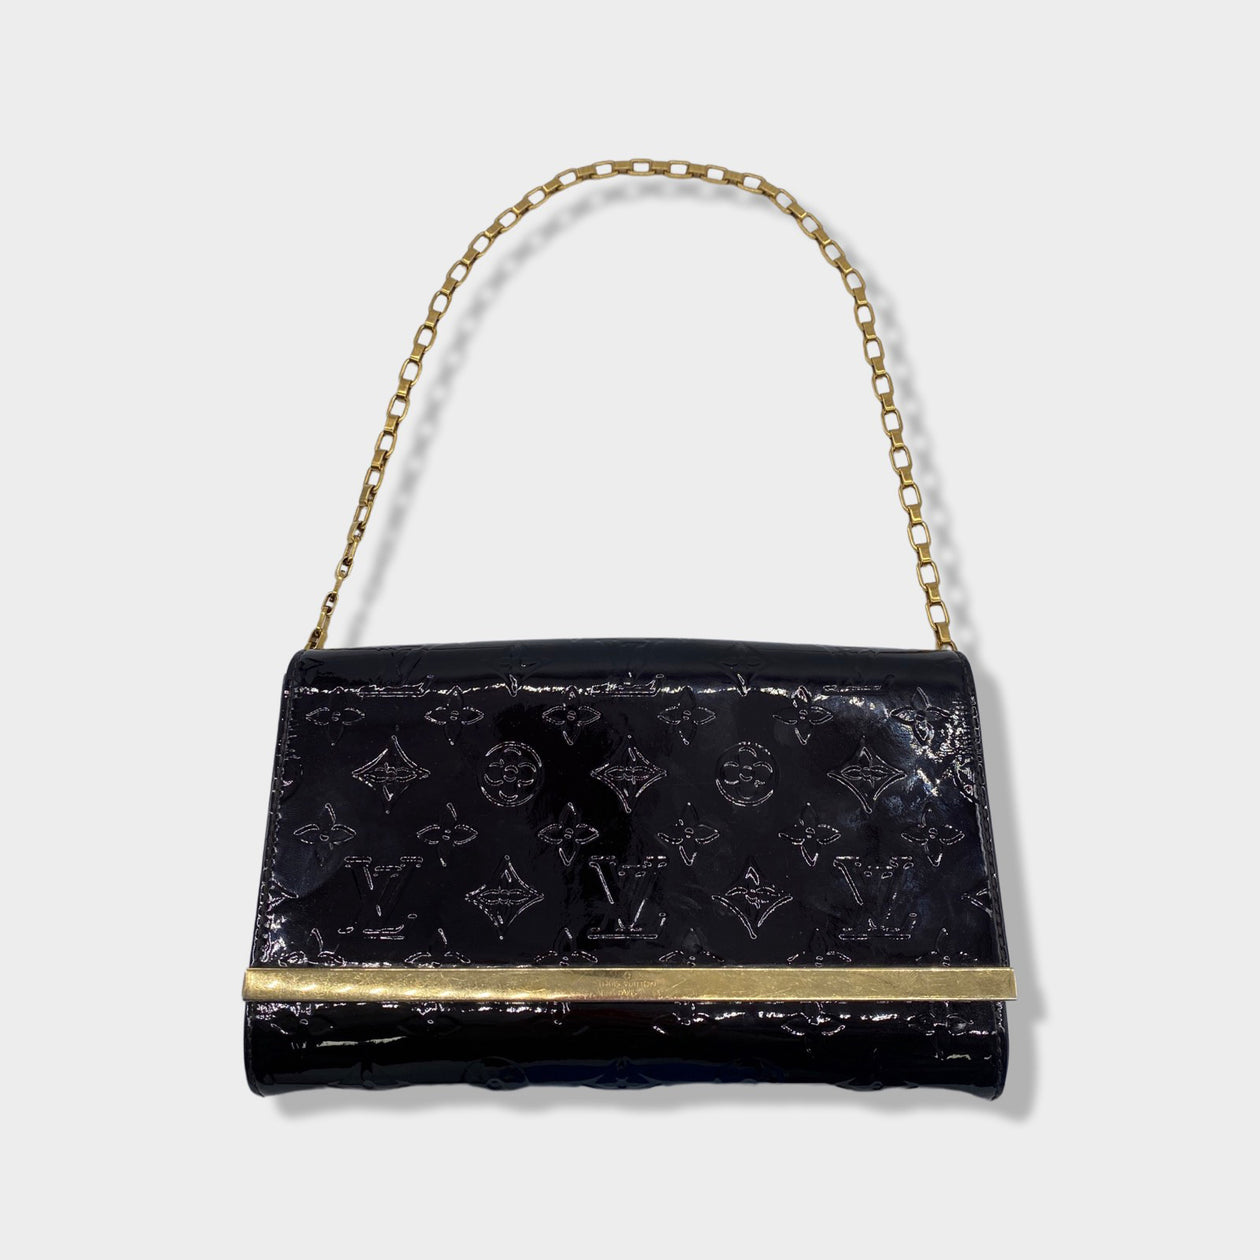 LOUIS VUITTON purple and gold monogram patent leather bag on a